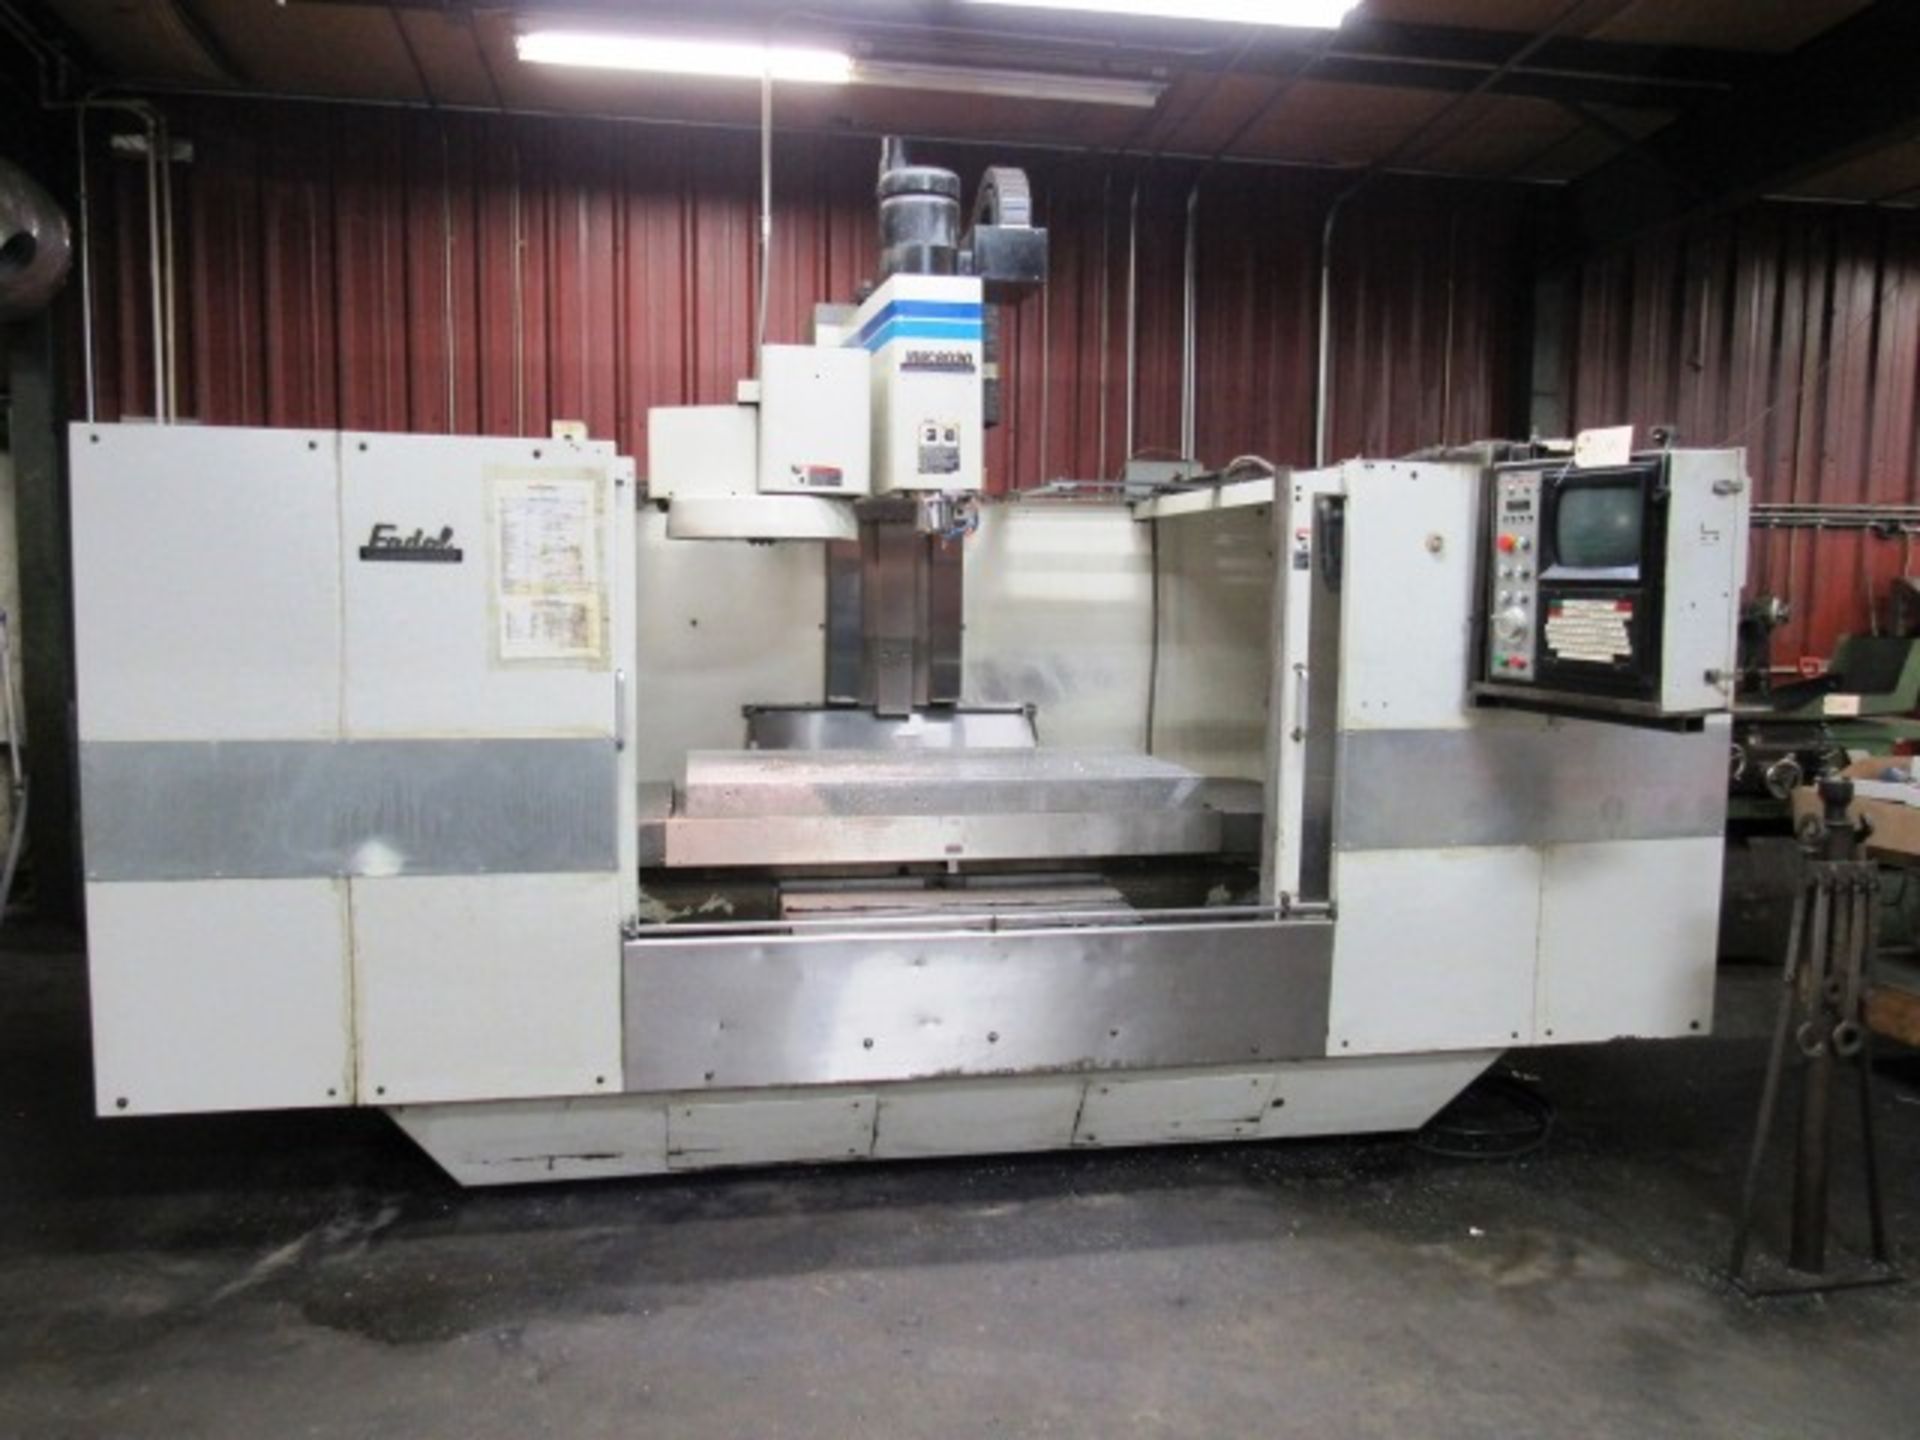 Fadal 6030HT CNC Vertical Machining Center with 62.5'' x 30'' Table, #40 Spindle Speeds to 10,000 - Image 3 of 5